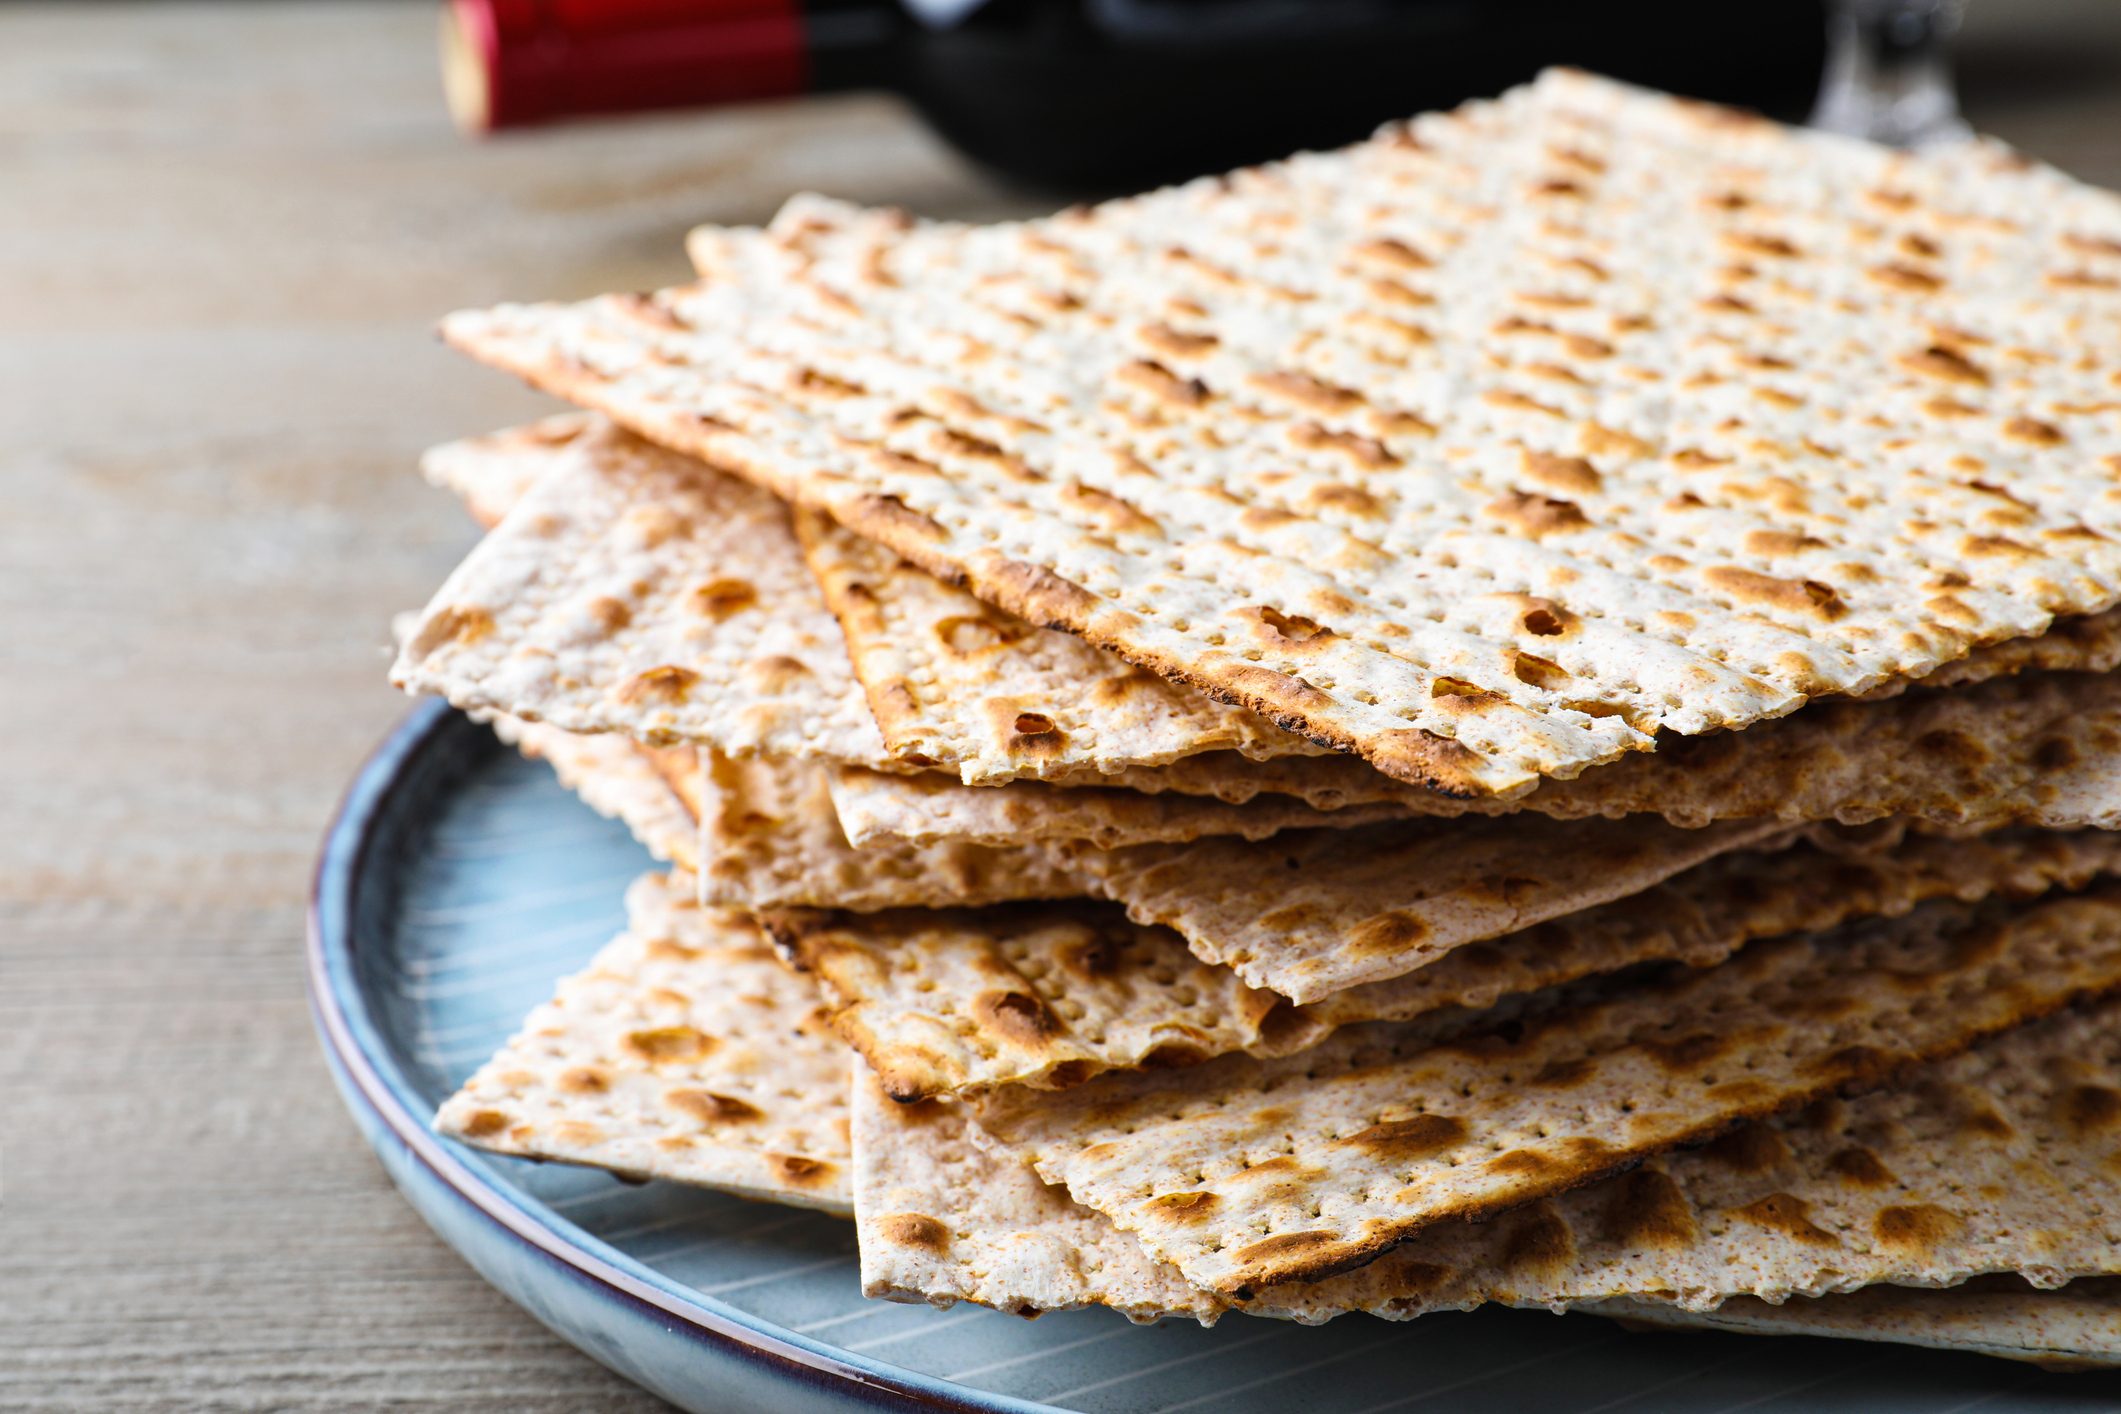 Are crackers the same as unleavened bread?